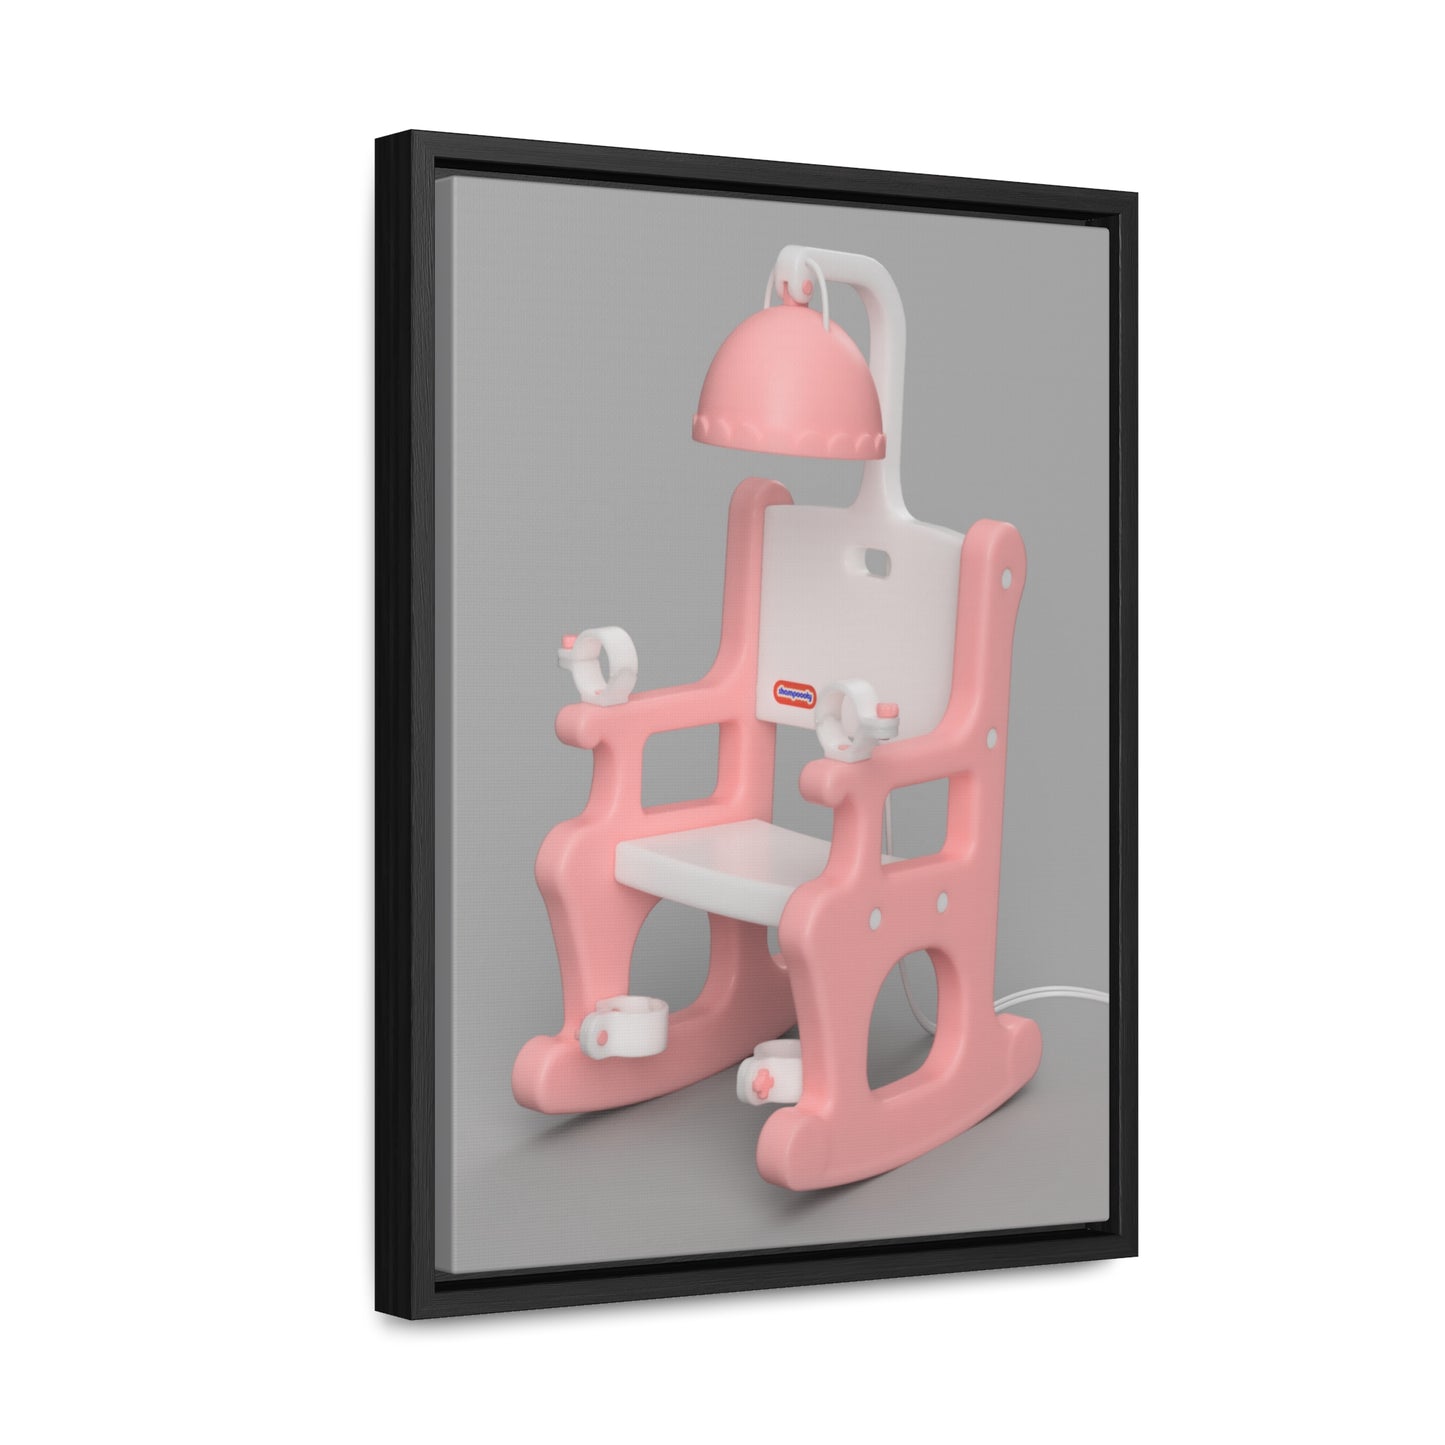 Electric Chair Gallery Wrap (Rendered) Framed